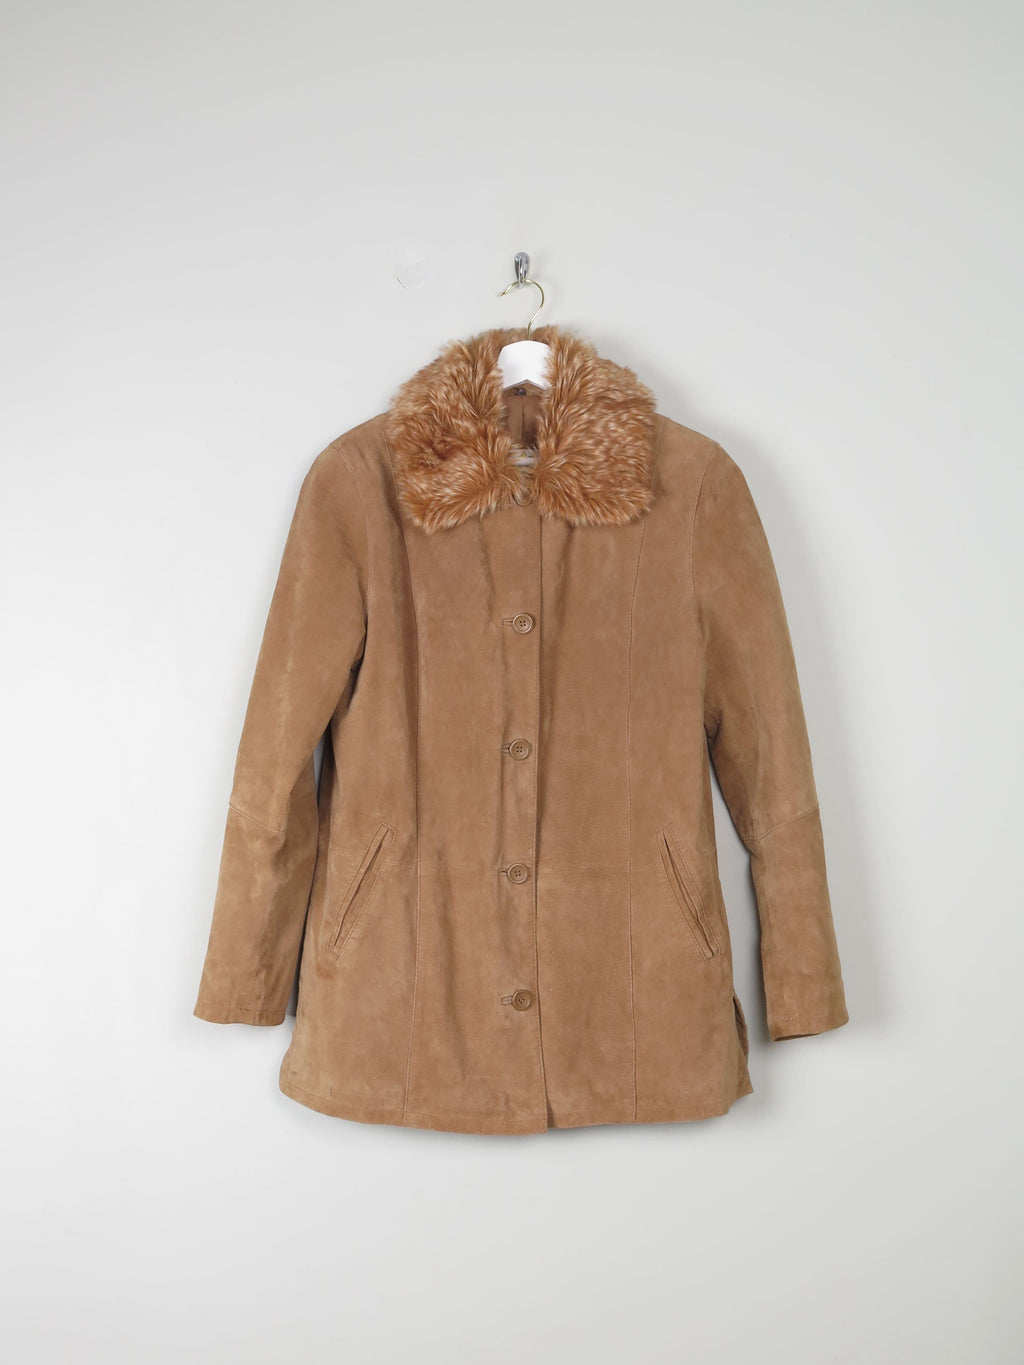 Women's Tan Suede Jacket With Furry Collar M - The Harlequin